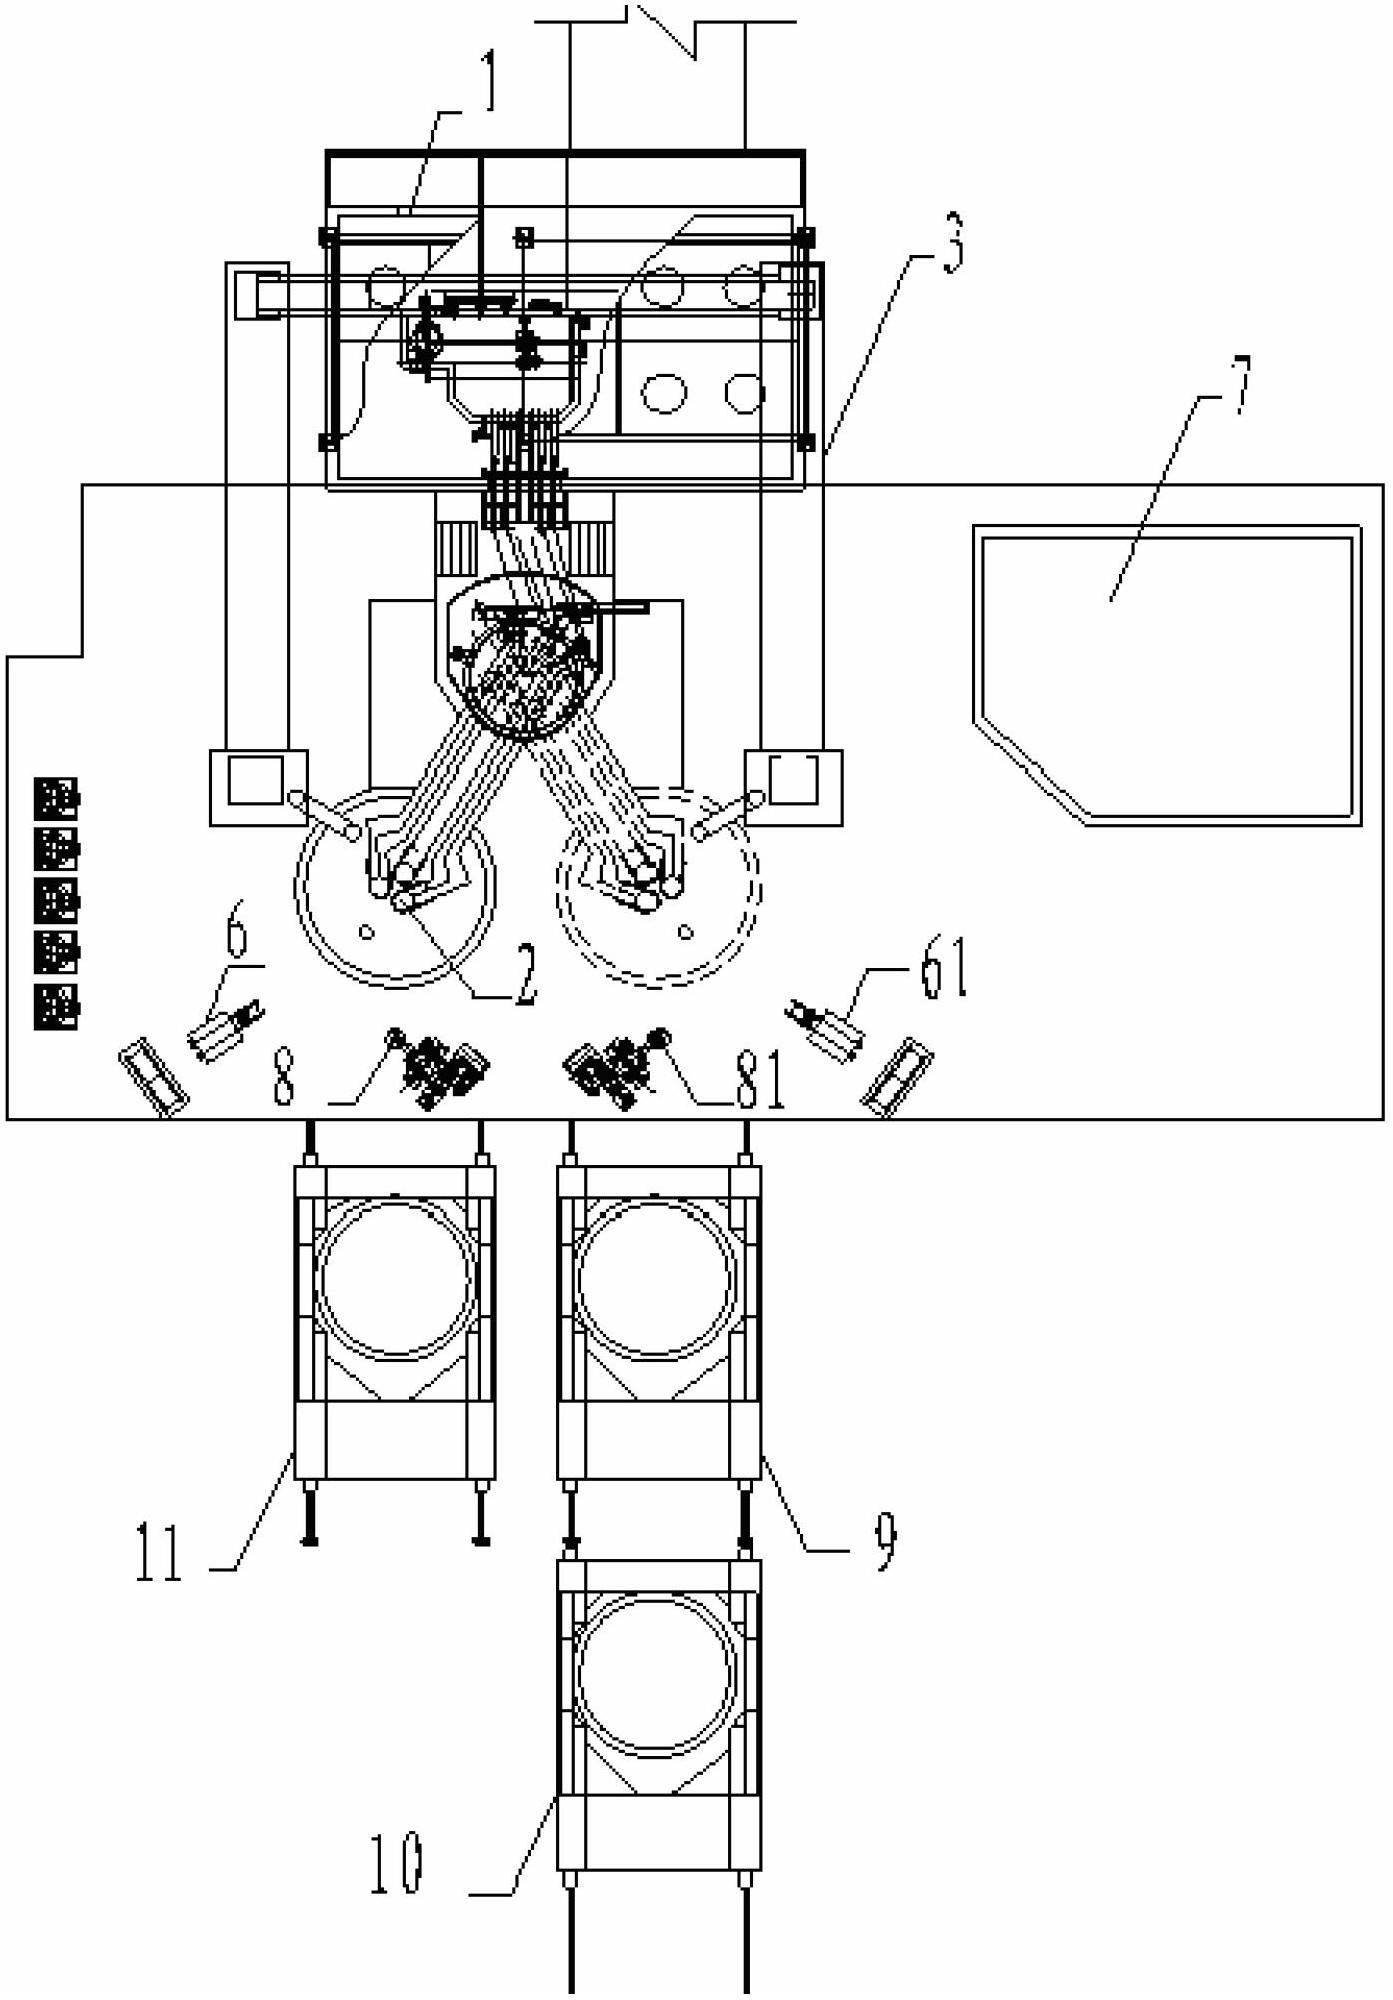 Online multifunctional double-station LF (Low-Frequency) furnace system and online LF furnace steelmaking method